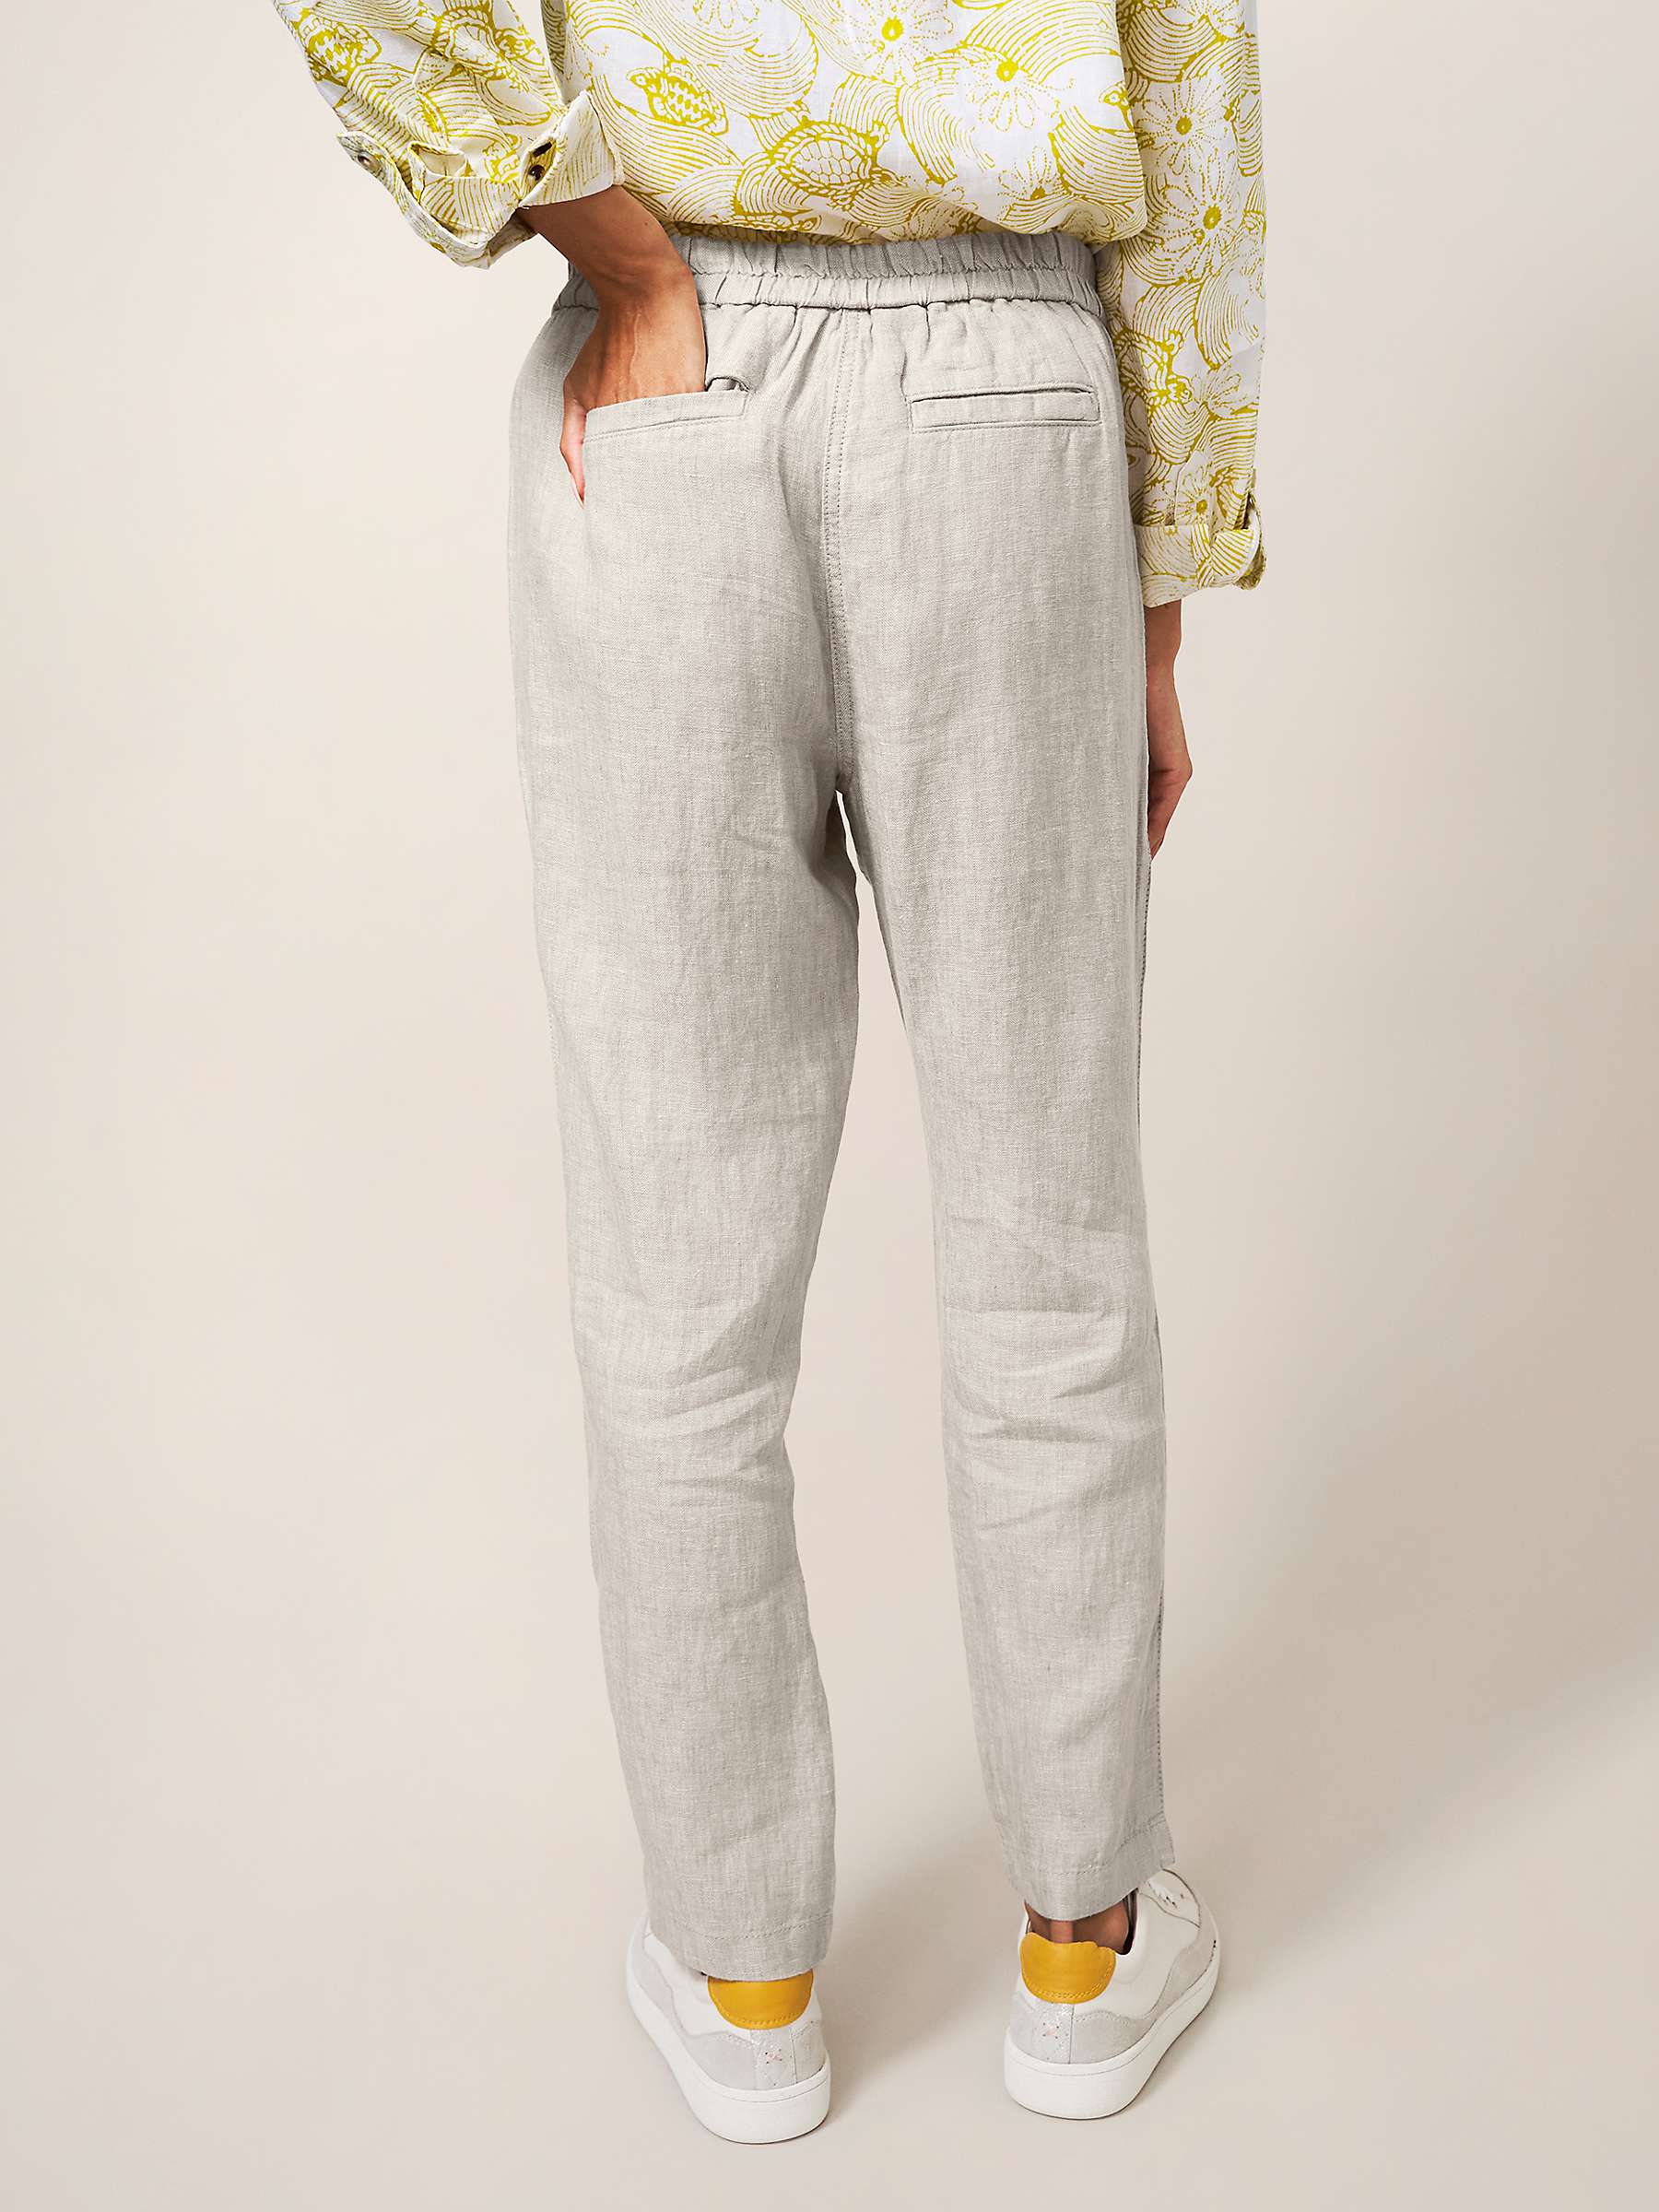 Buy White Stuff Rowena Linen Trousers Online at johnlewis.com